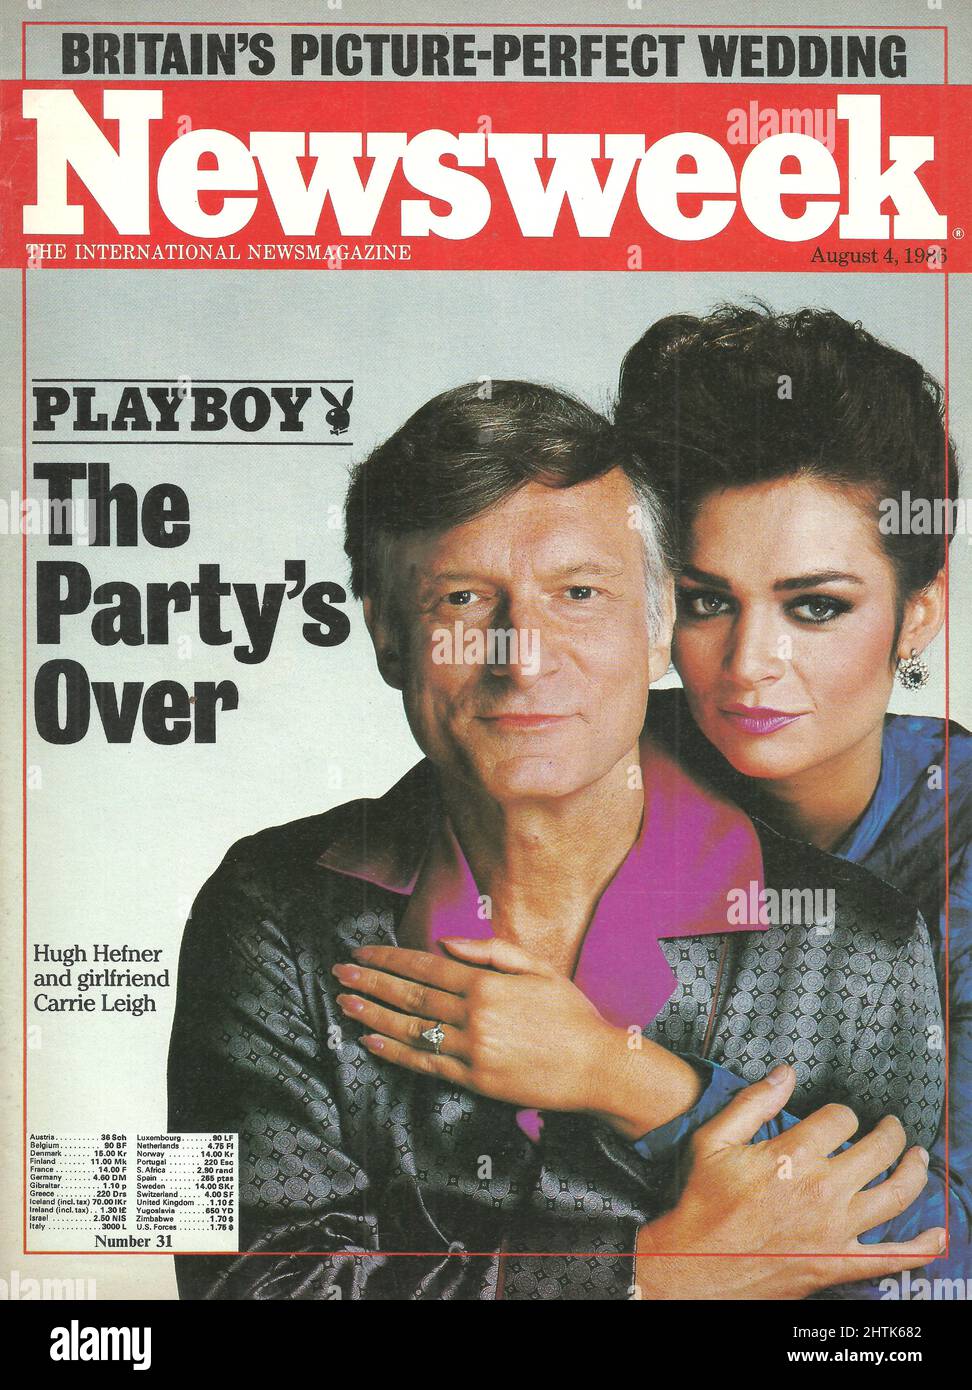 Newsweek cover August 4 1986 Playboy Huhg Hefner and girlfriend Carrie Leigh; Britain's Picture-Perfect wedding Stock Photo